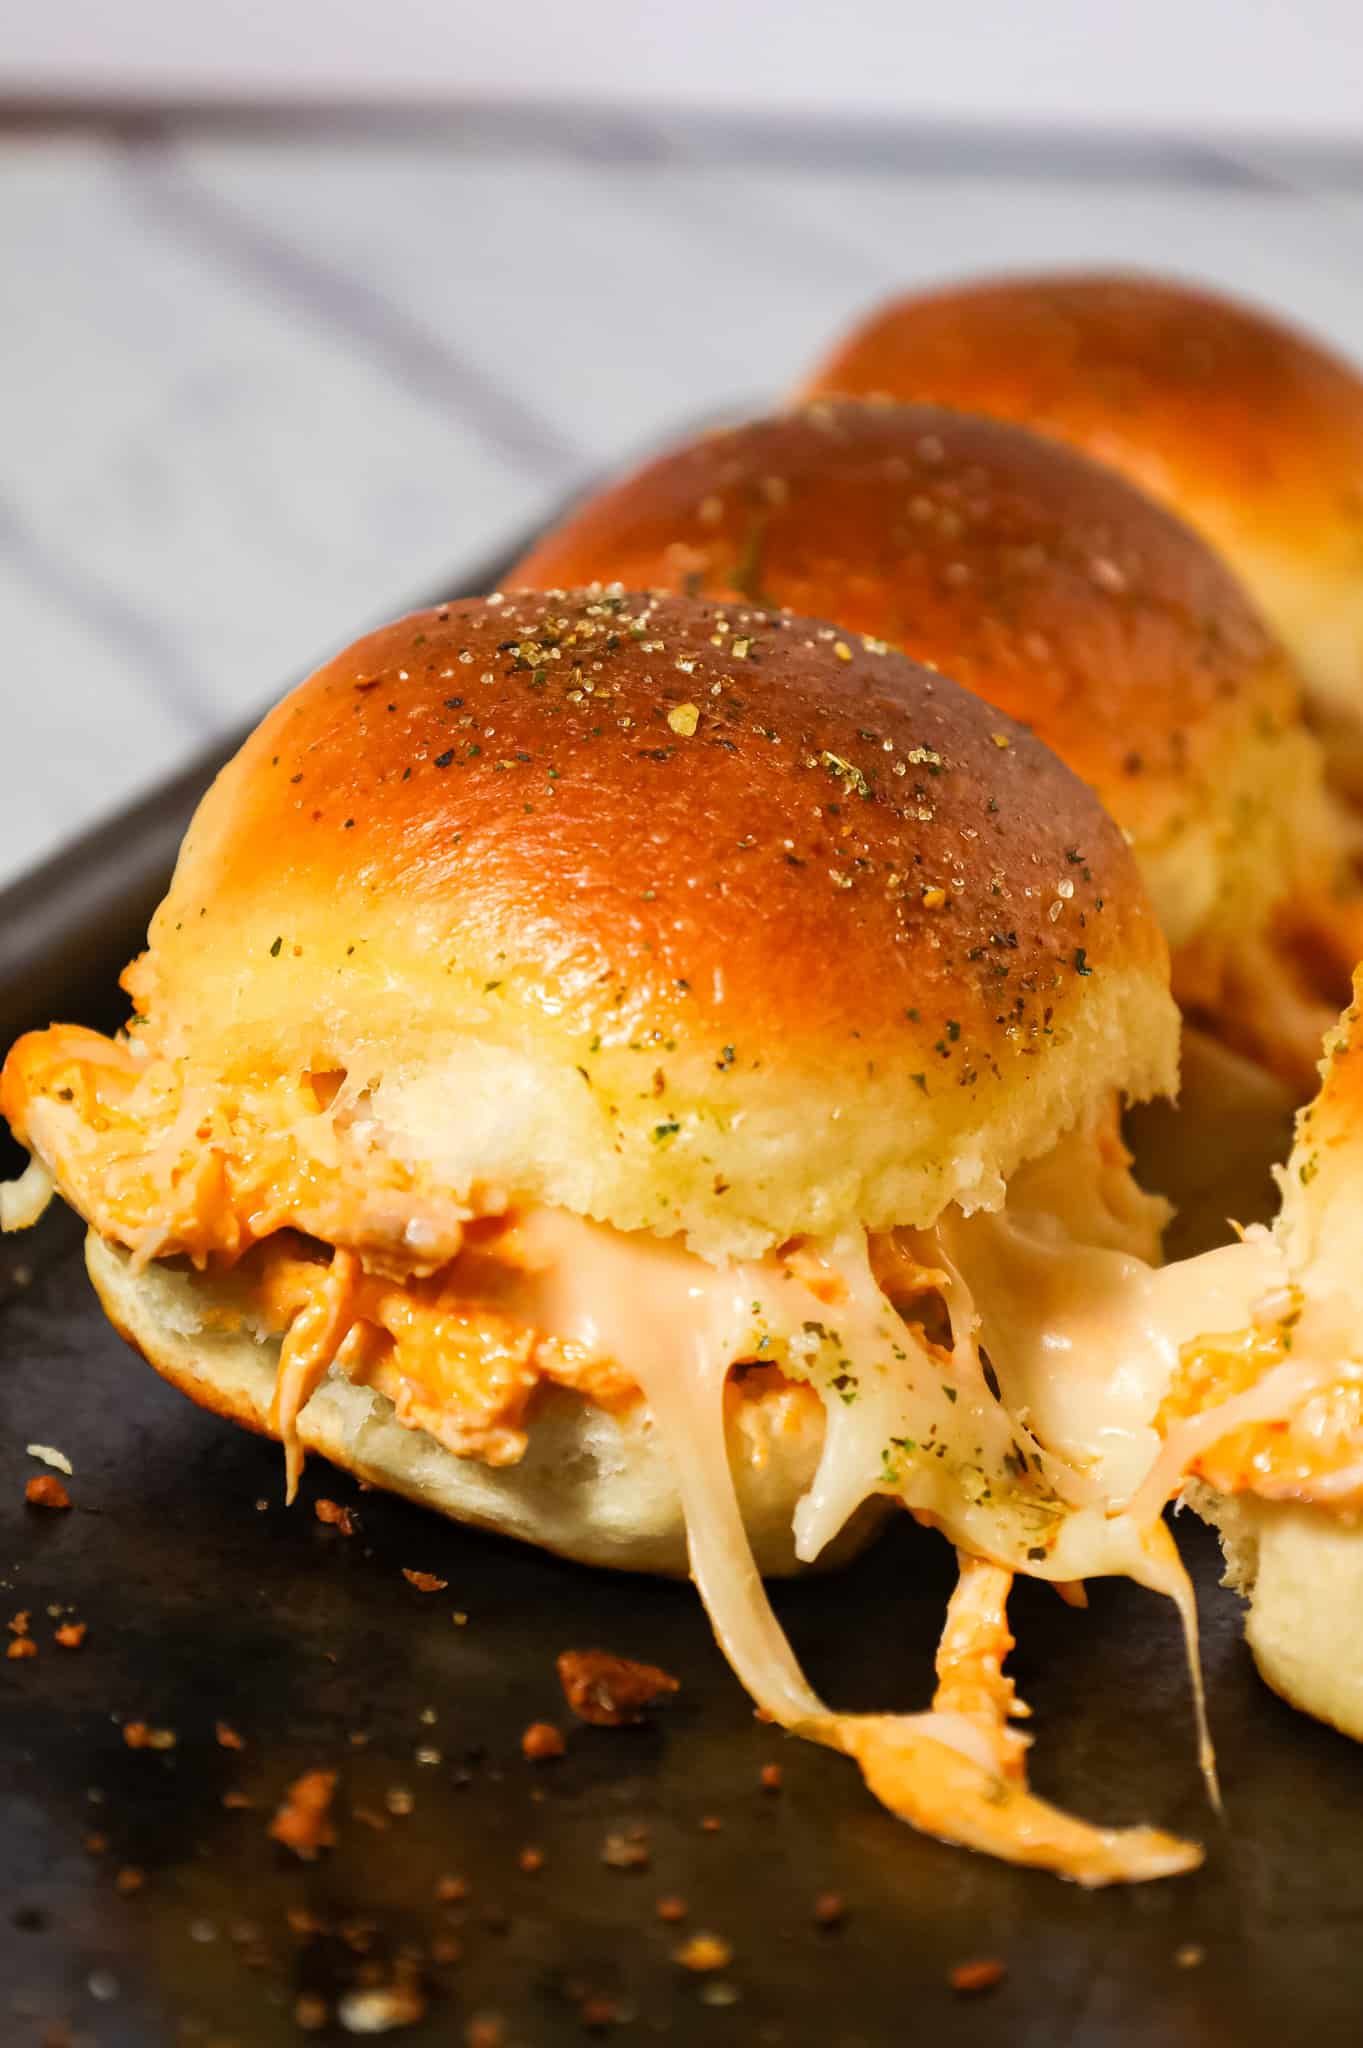 Buffalo Chicken Sliders are an easy weeknight dinner recipe using shredded rotisserie chicken, Buffalo sauce, ranch dressing, shredded cheese and chopped green onions all baked on dinner rolls.